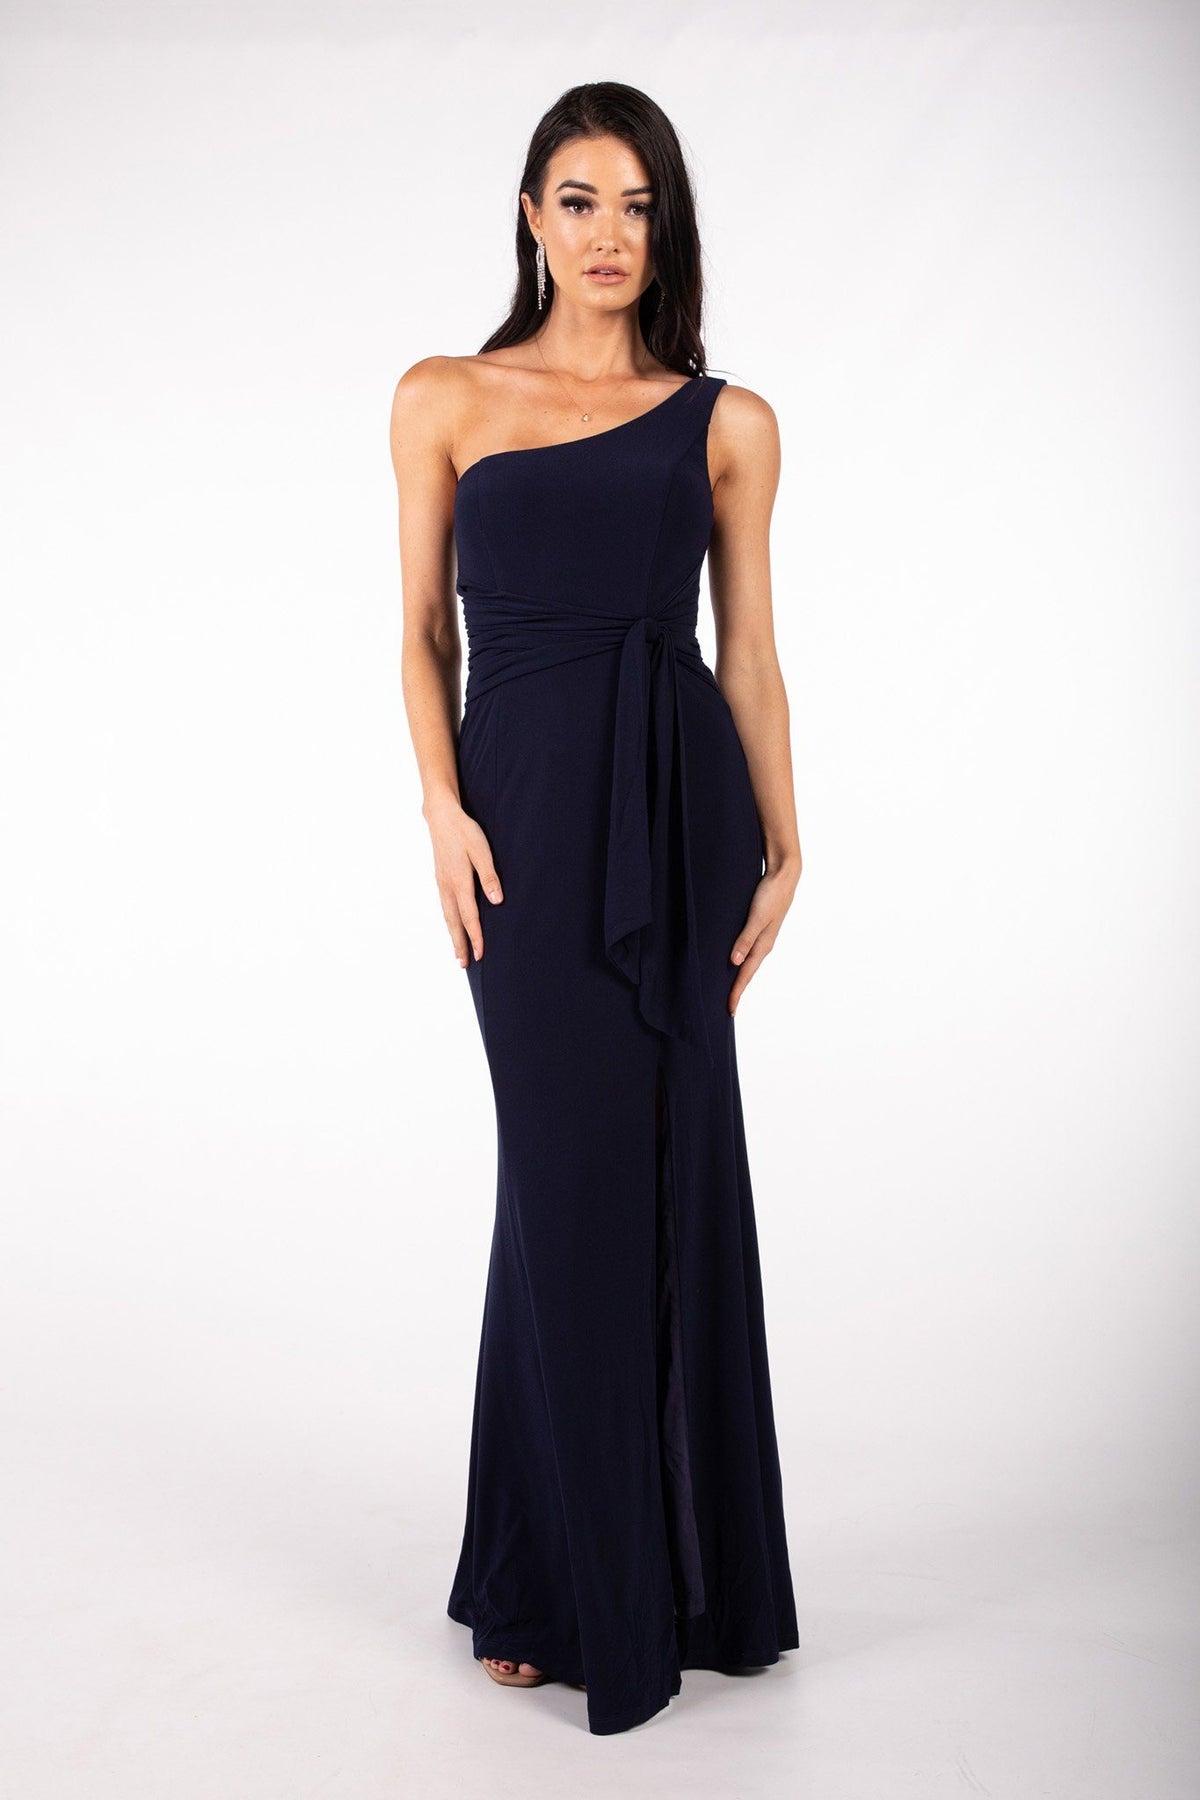 Navy One Shoulder Maxi-Length Dress with Asymmetrical Neckline, Waist Tie, Above Knee High Slit, and a Column Styled Silhouette